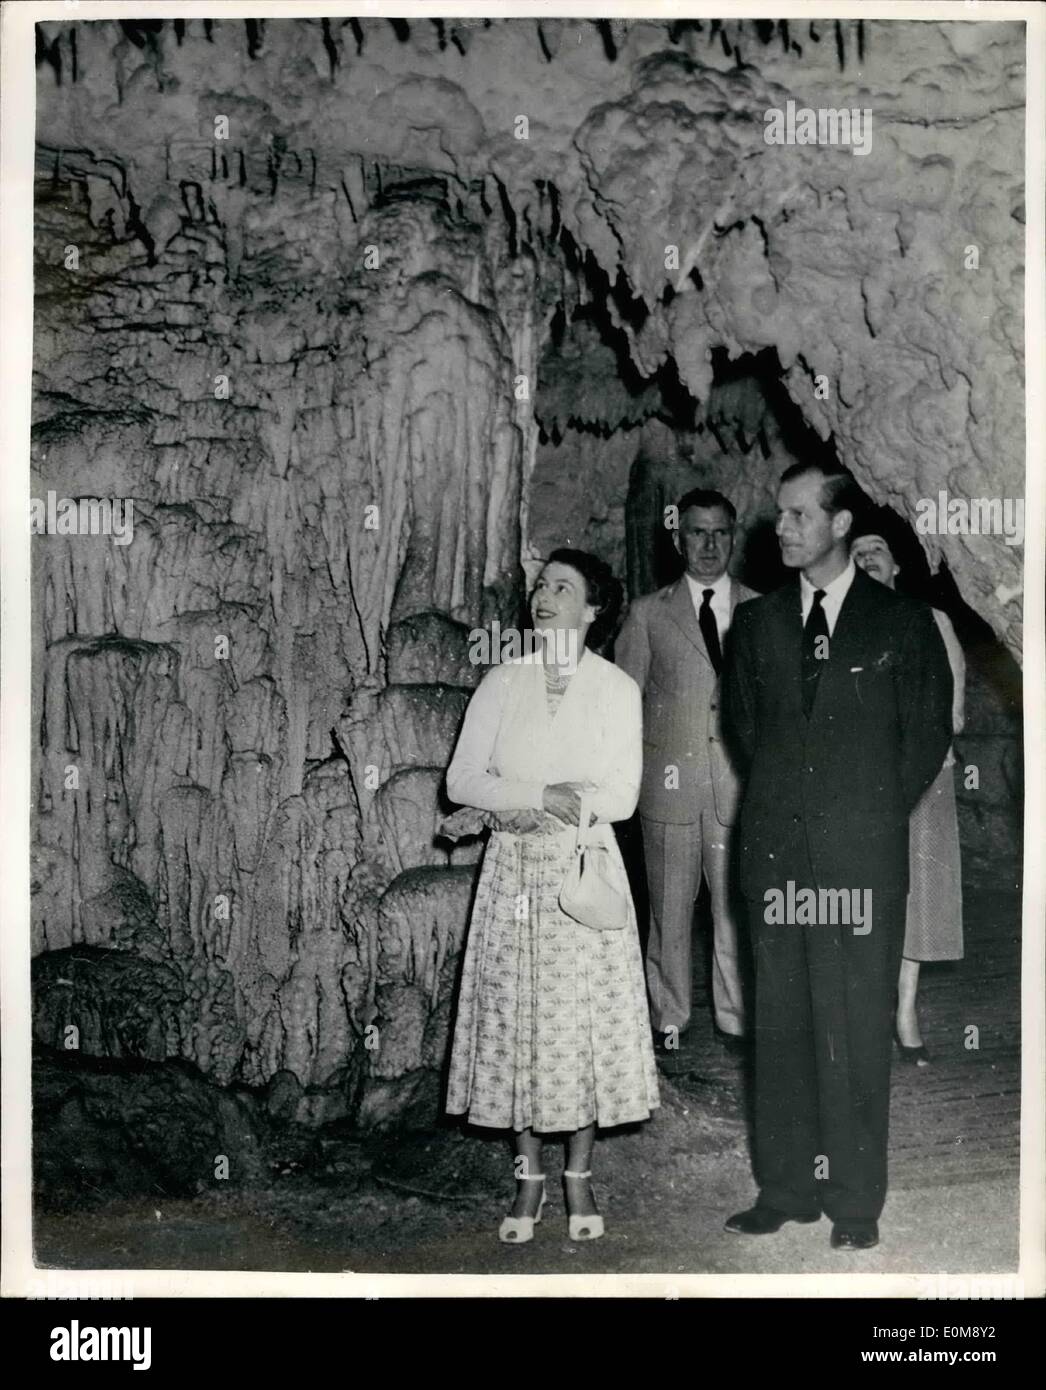 Jan. 01, 1954 - Royal New Zealand tour. Queen and Duke in the glow worm cave. Photo shows The Queen and Duke of Edinburgh seen in the glow - worm cave during their visit to Waitomo during their New Zealand tour. Stock Photo